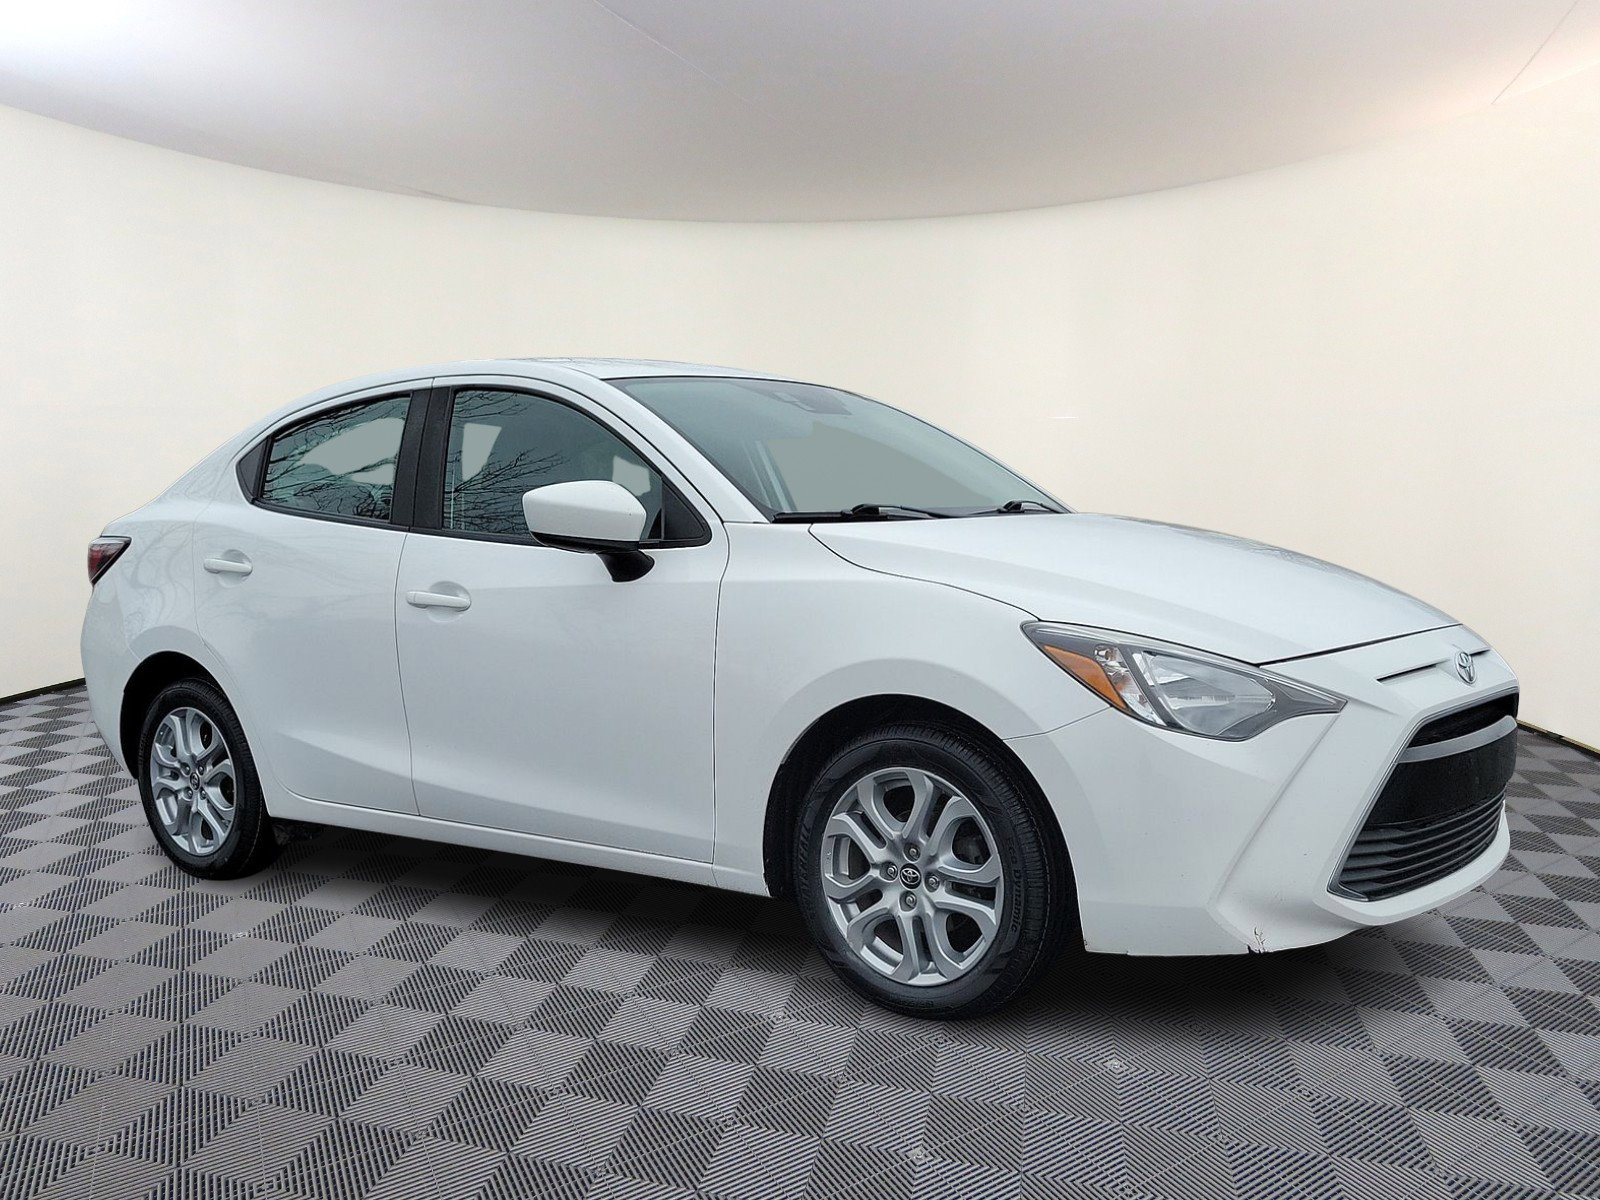 Used Toyota Yaris iA for Sale Near Me in Hummelstown, PA - Autotrader